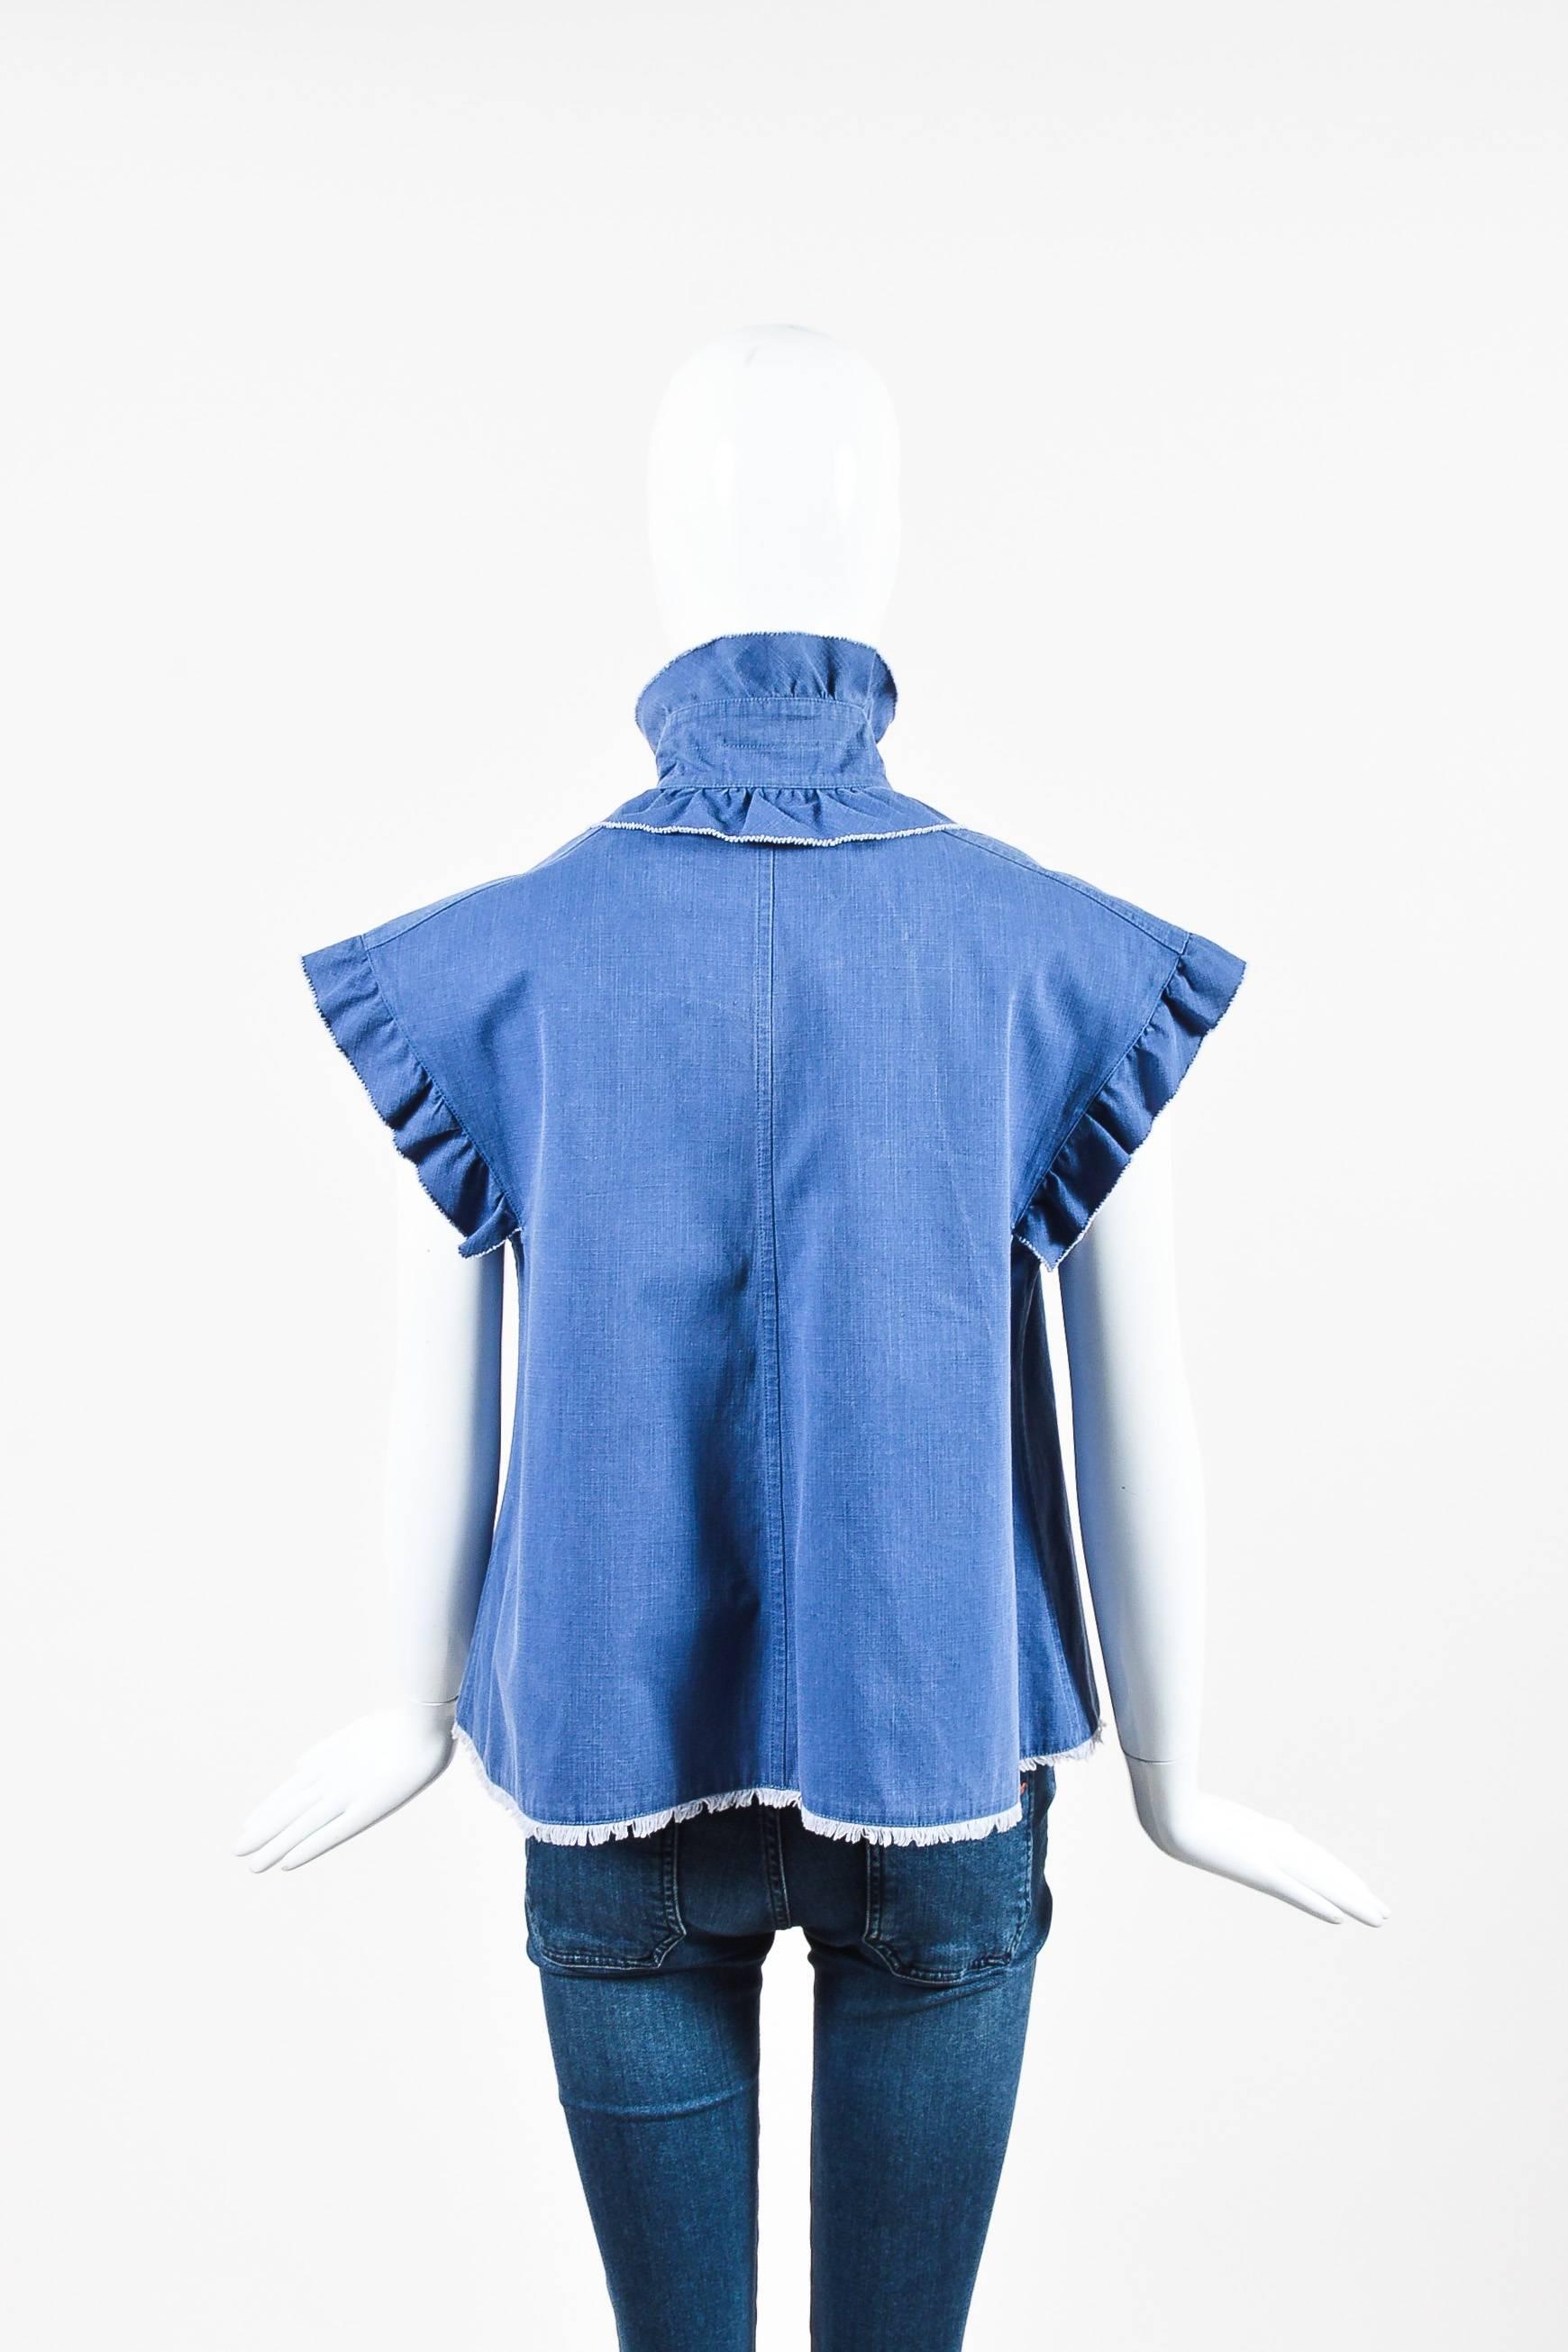 Chanel 07C blue cotton denim A-line blouse featuring ruffle trim along collar, placket, and sleeves. Center front button closures are designed with a navy blue enamel center and silver-tone metal 